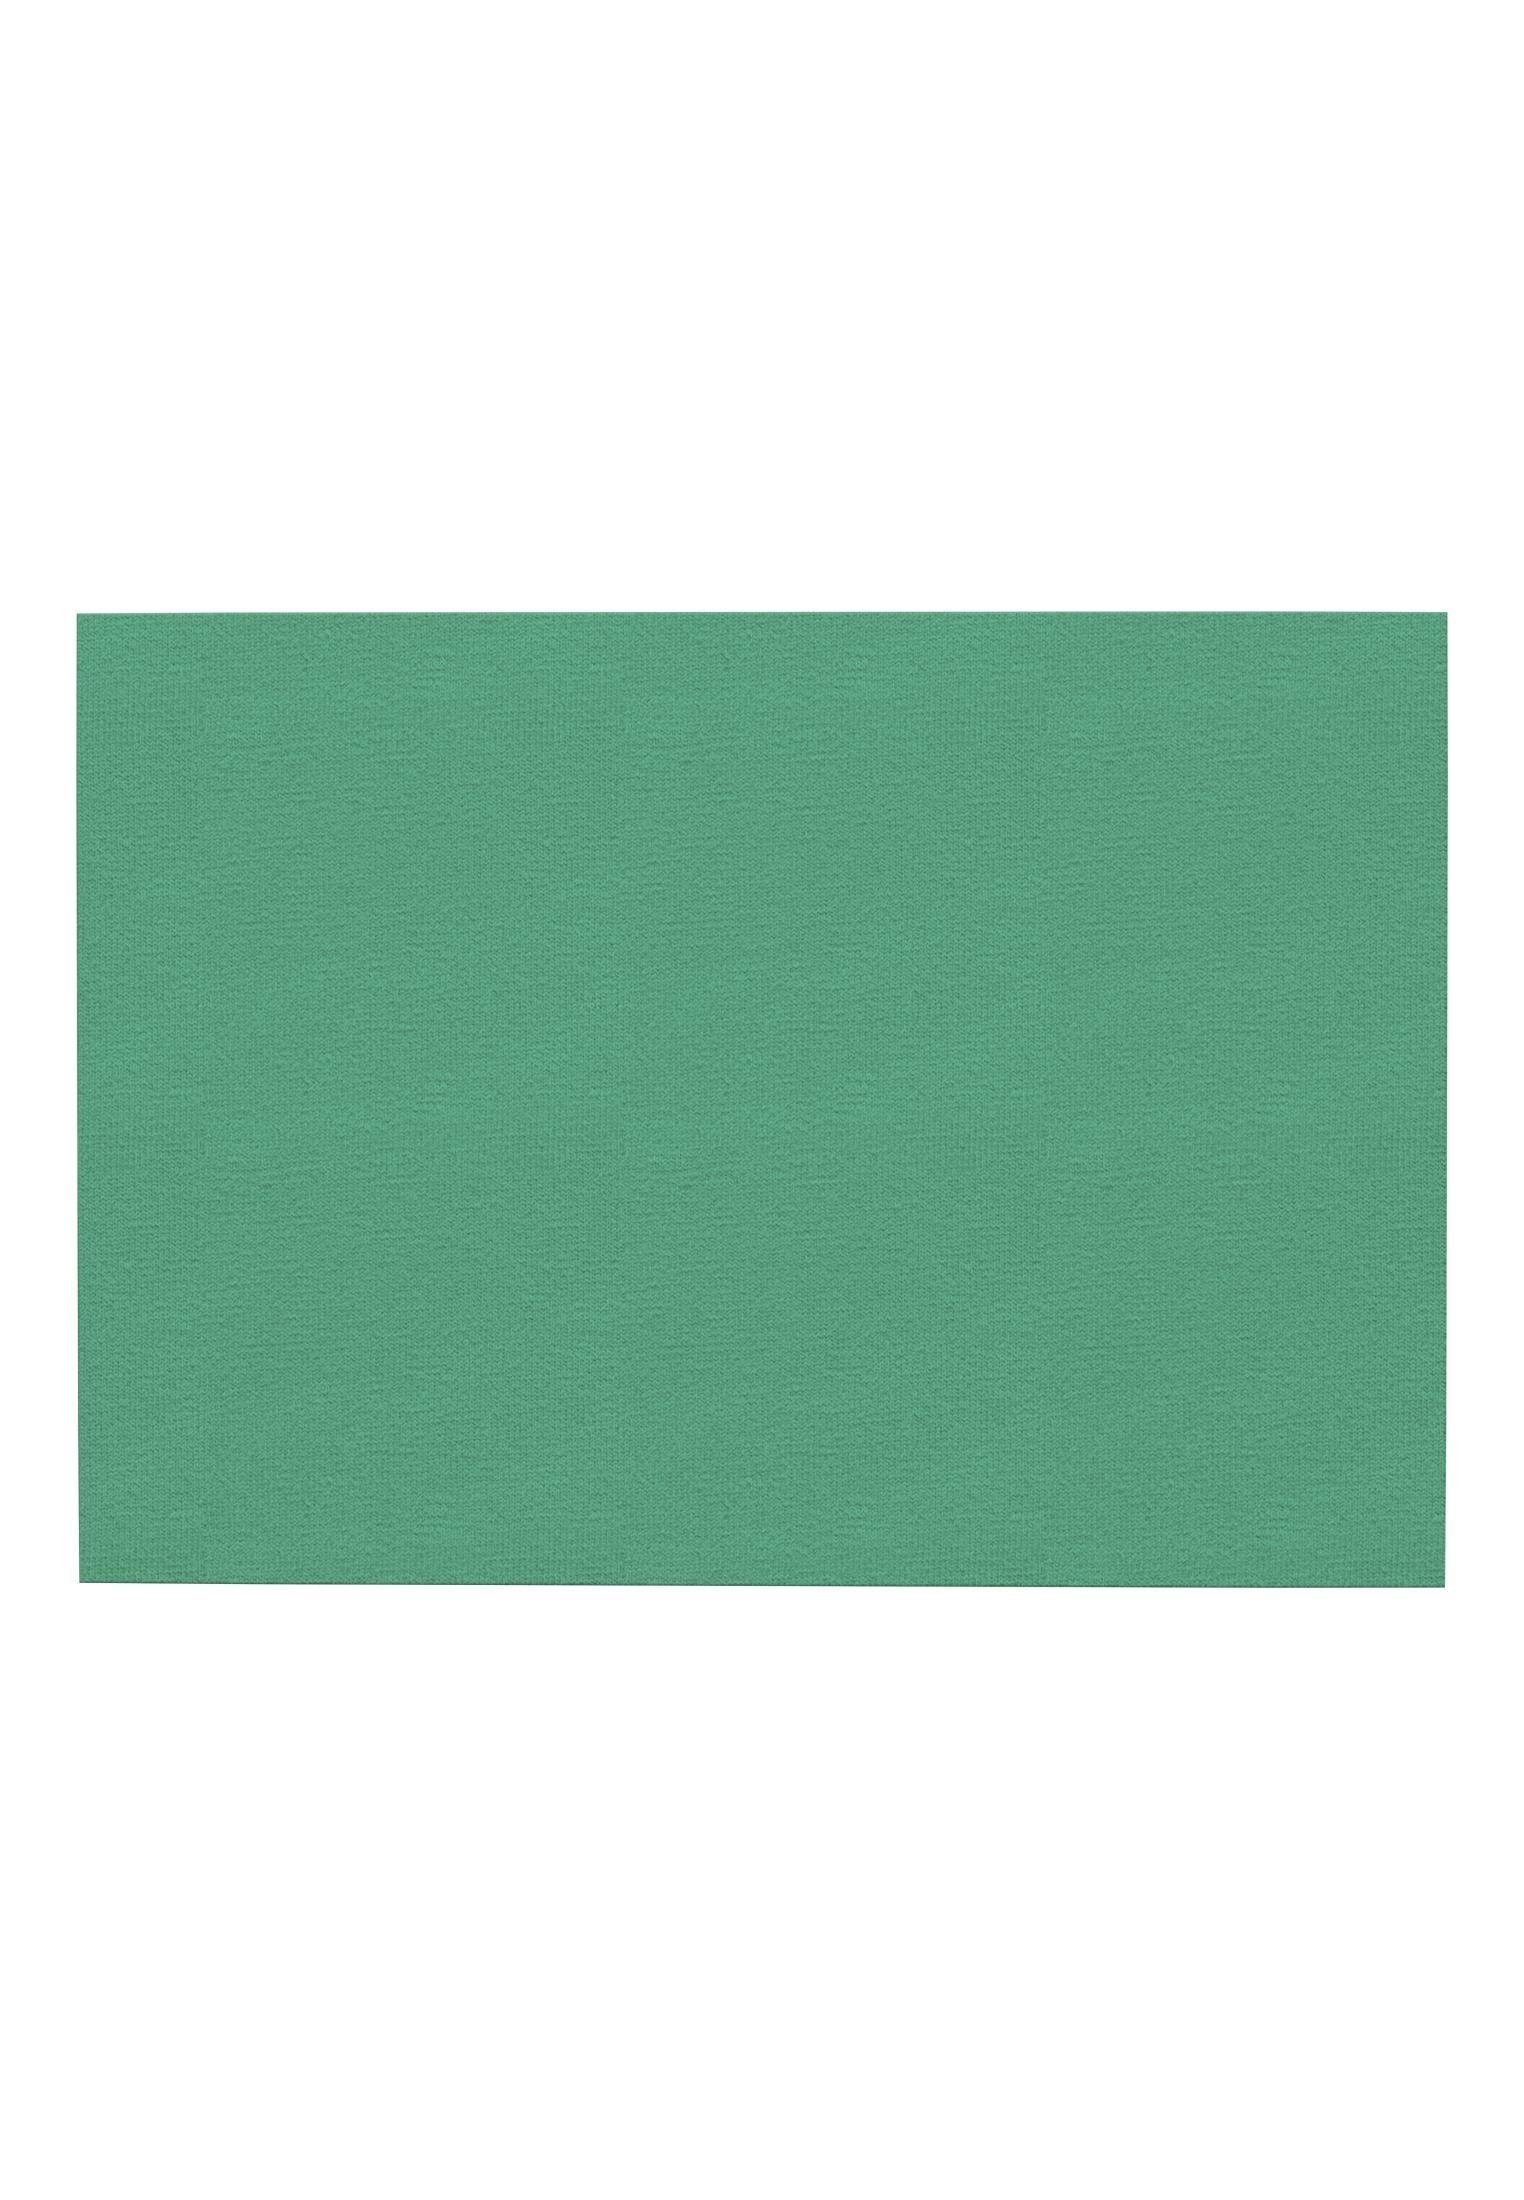 Name 2P It Slip spruce NKMBOXER (2-St) green